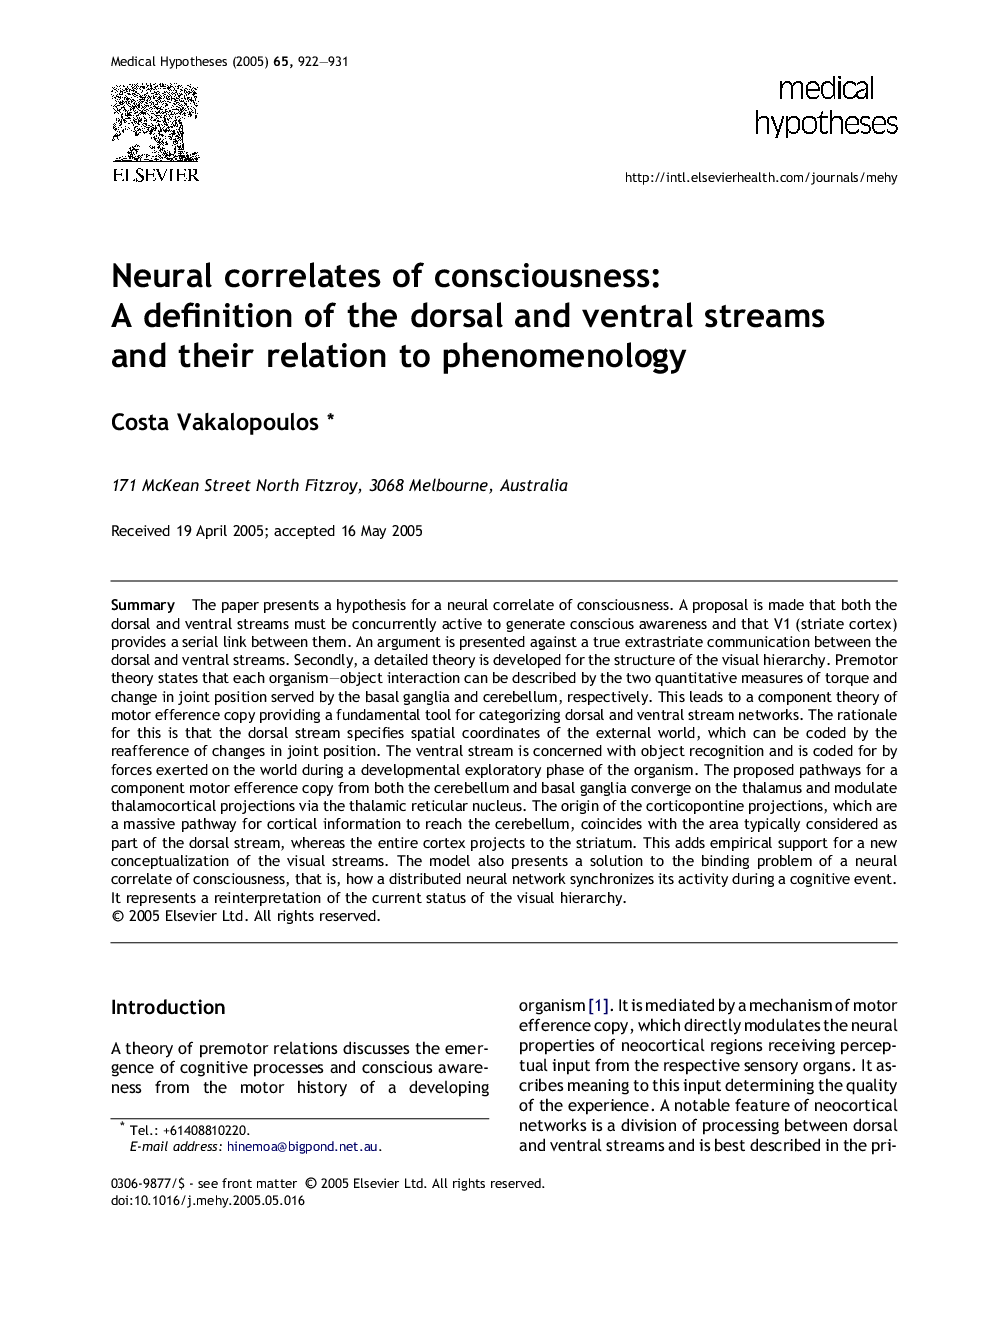 Neural correlates of consciousness: A definition of the dorsal and ventral streams and their relation to phenomenology